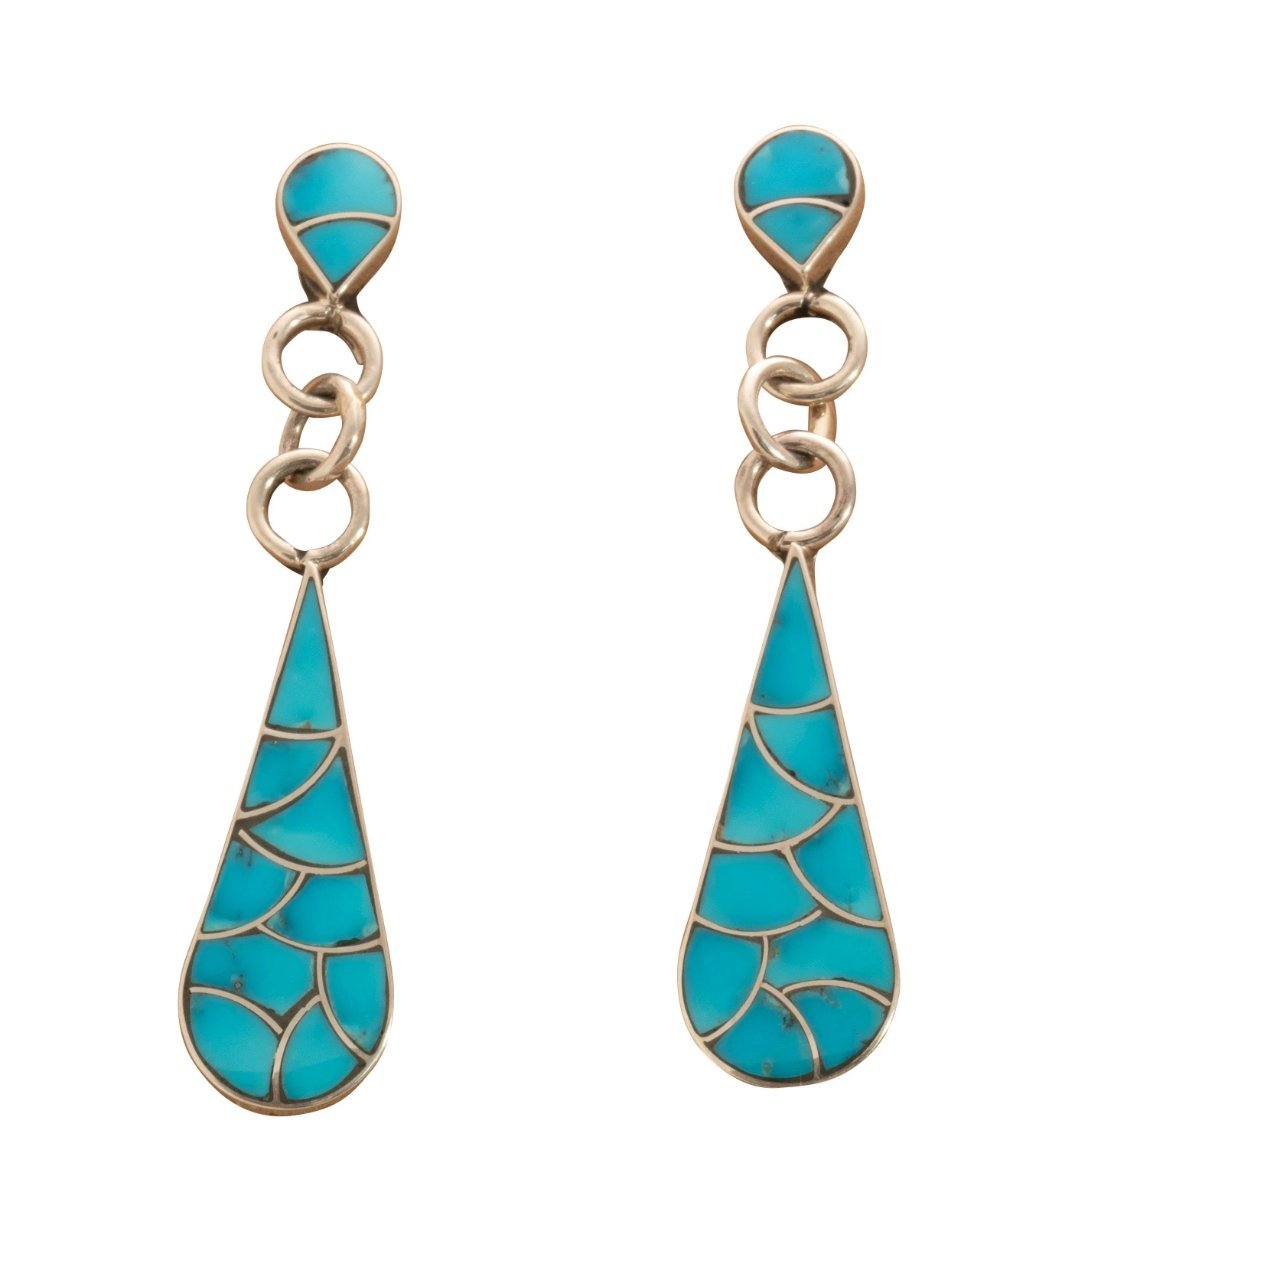 Elongated Zuni Dangle Earrings of Turquoise Fish Scale Inlay in Sterling Silver - Turquoise & Tufa